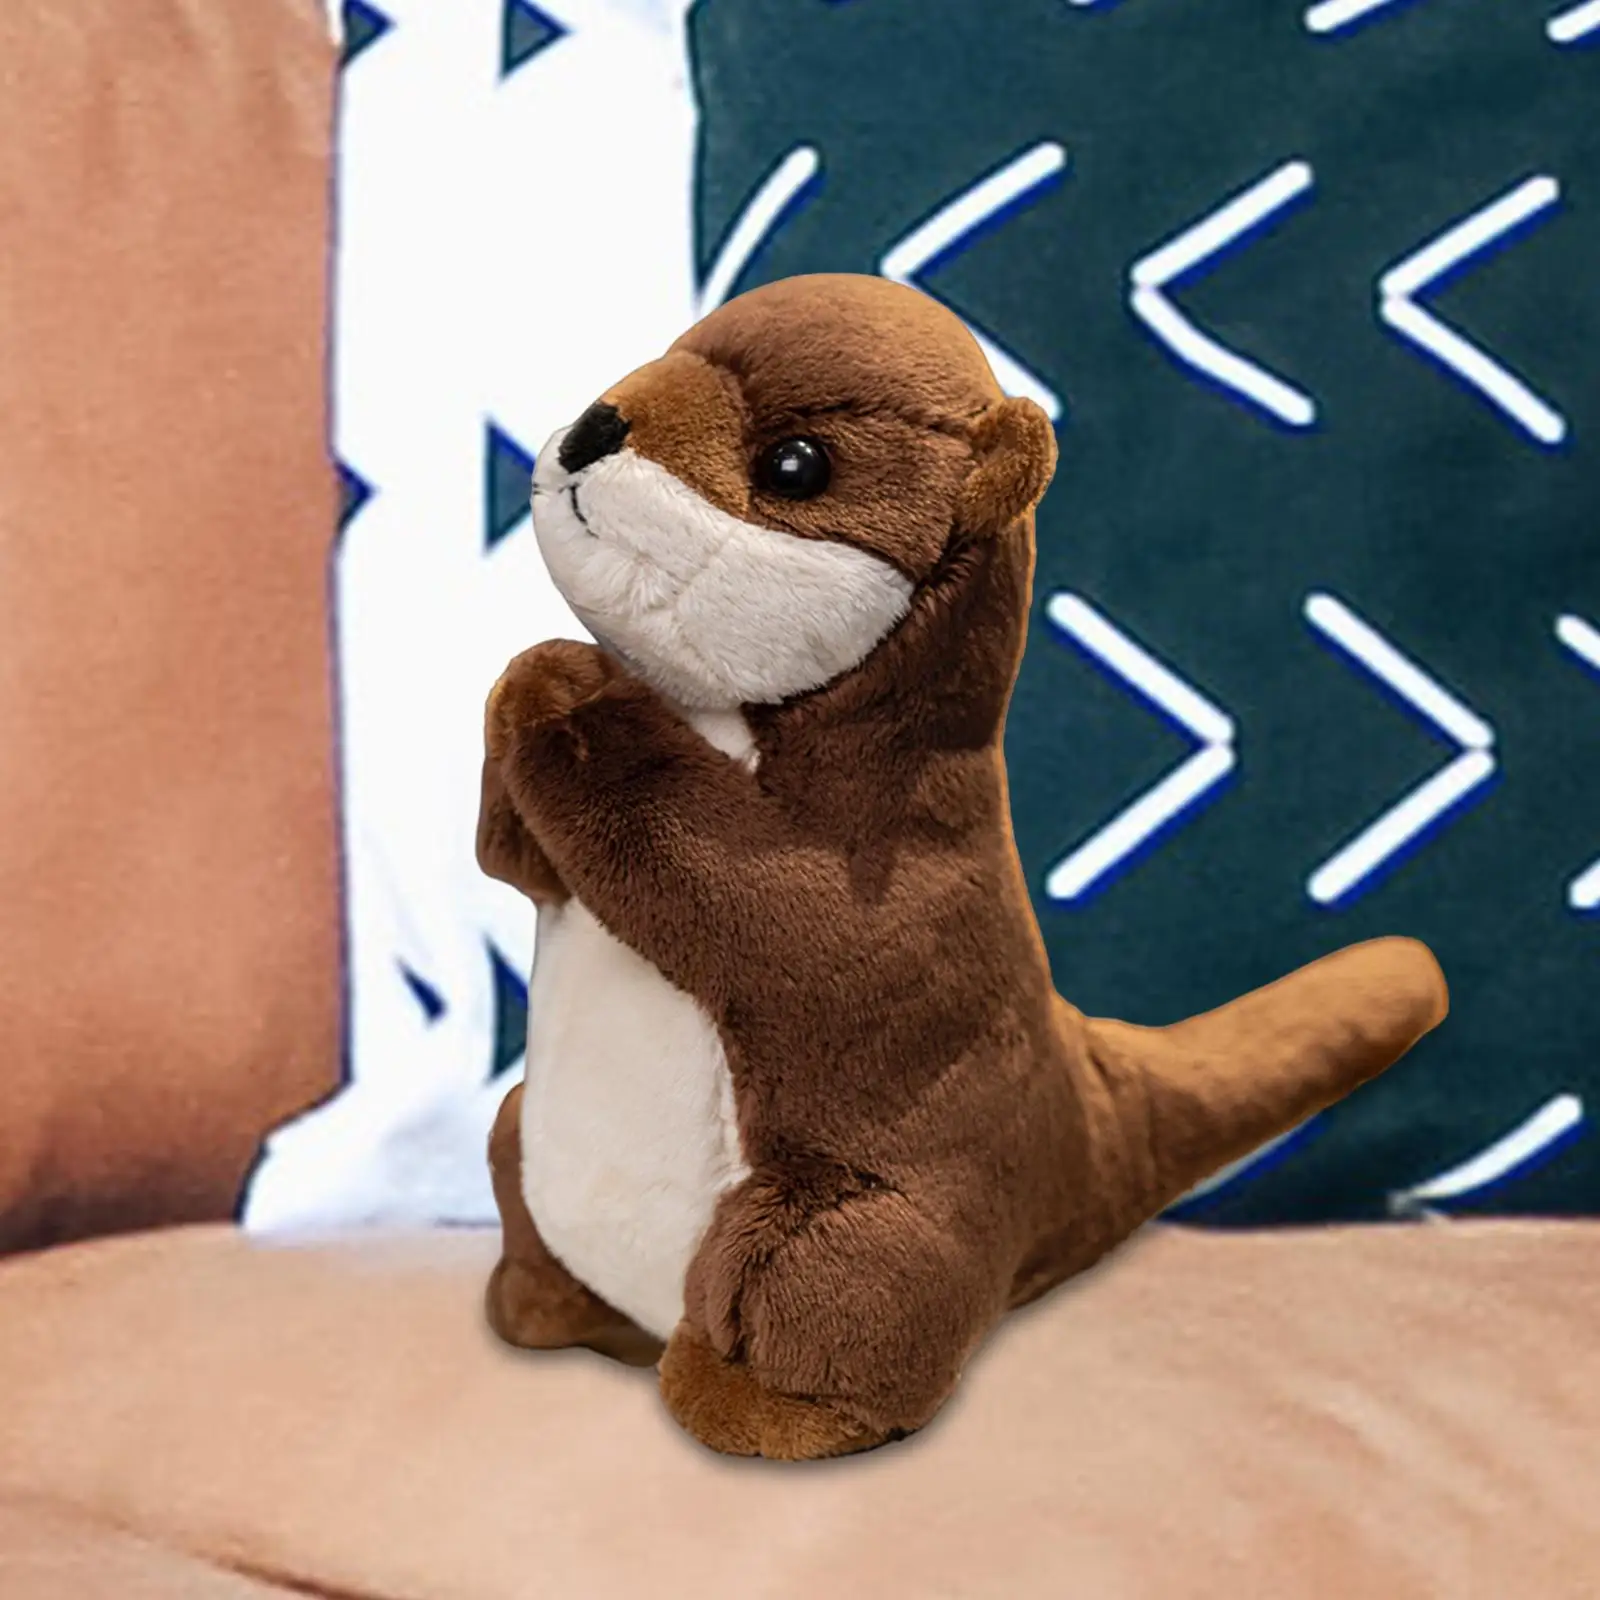 Cute Otter Plush Toys 19cm Cuddly Party Favors Photo Props Creative Gifts Sofa Ornaments for Boy Girls Kids Teens Children